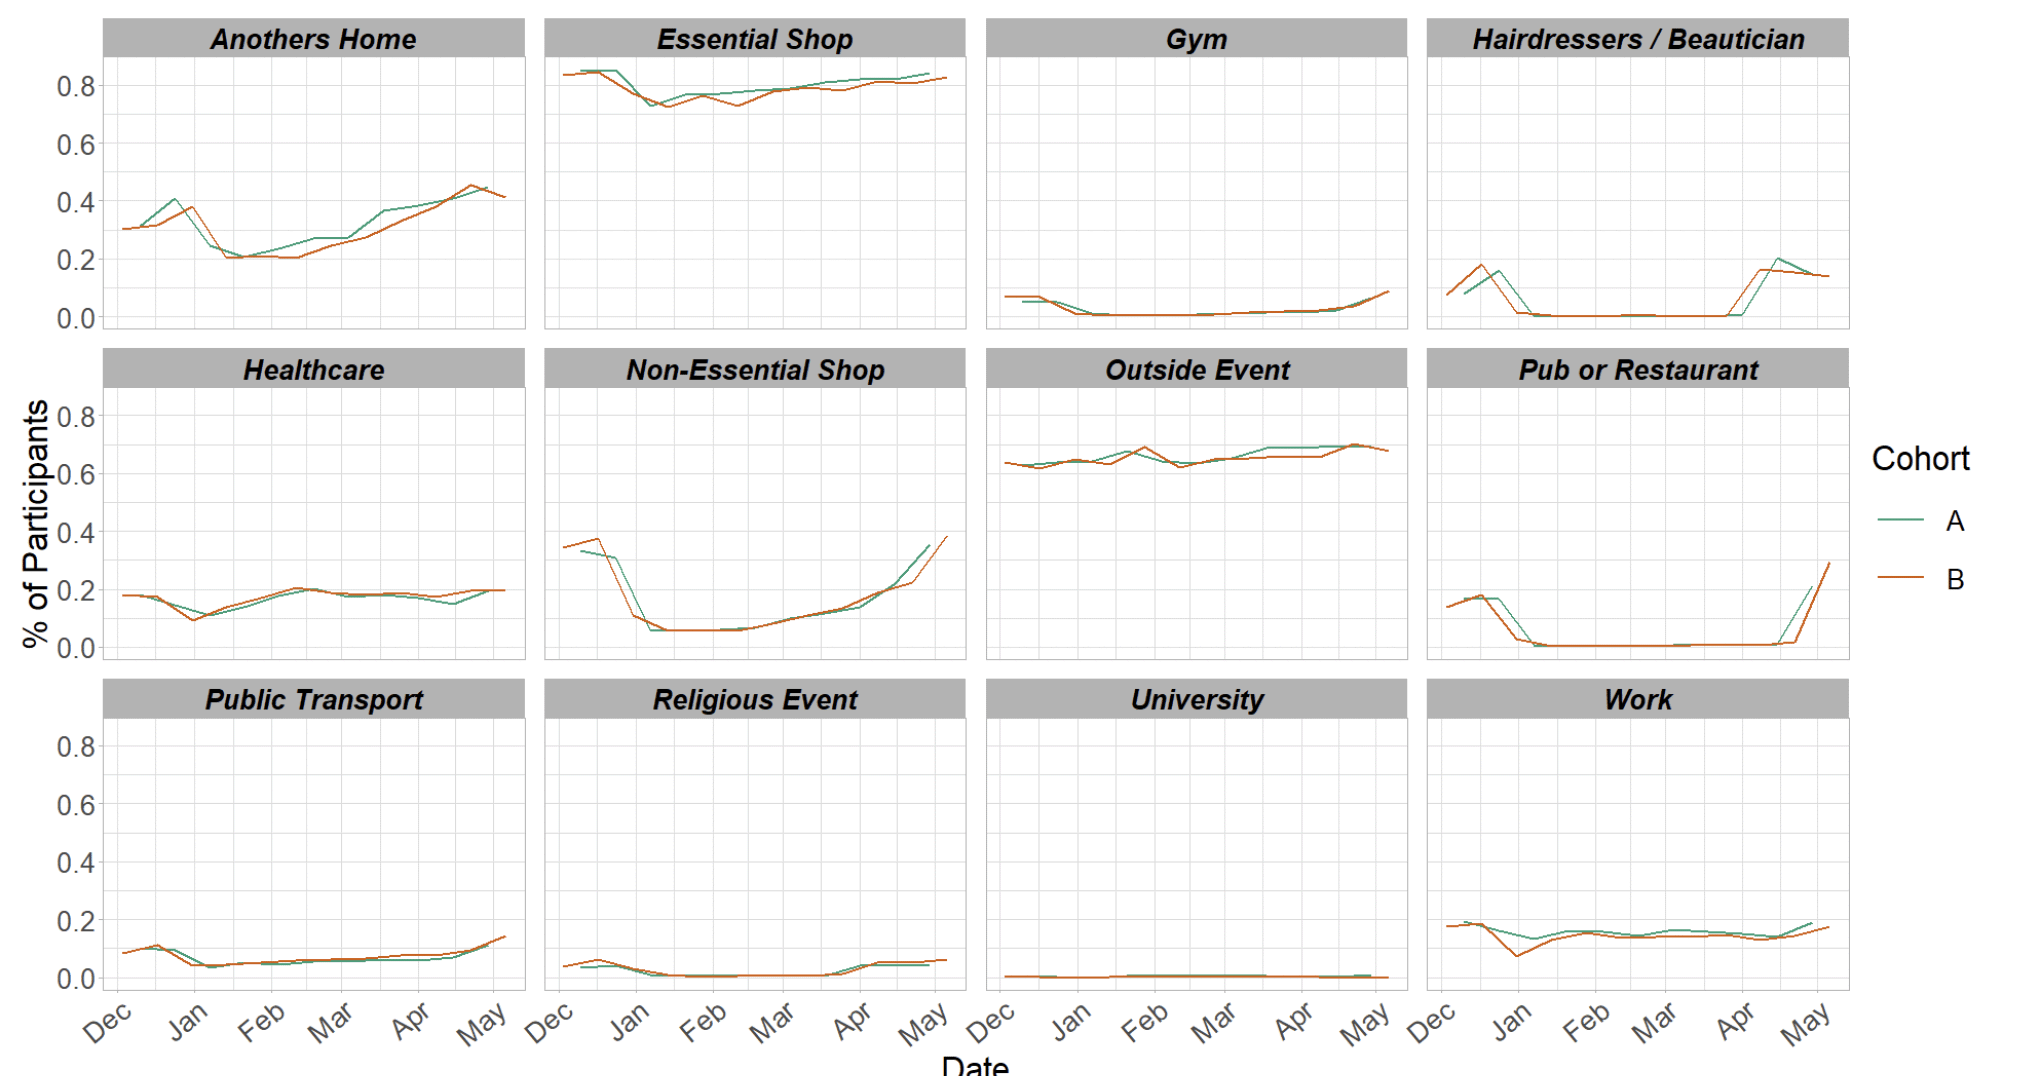 A series of line graphs showing locations visited by participants at least once for panel A and B in various settings